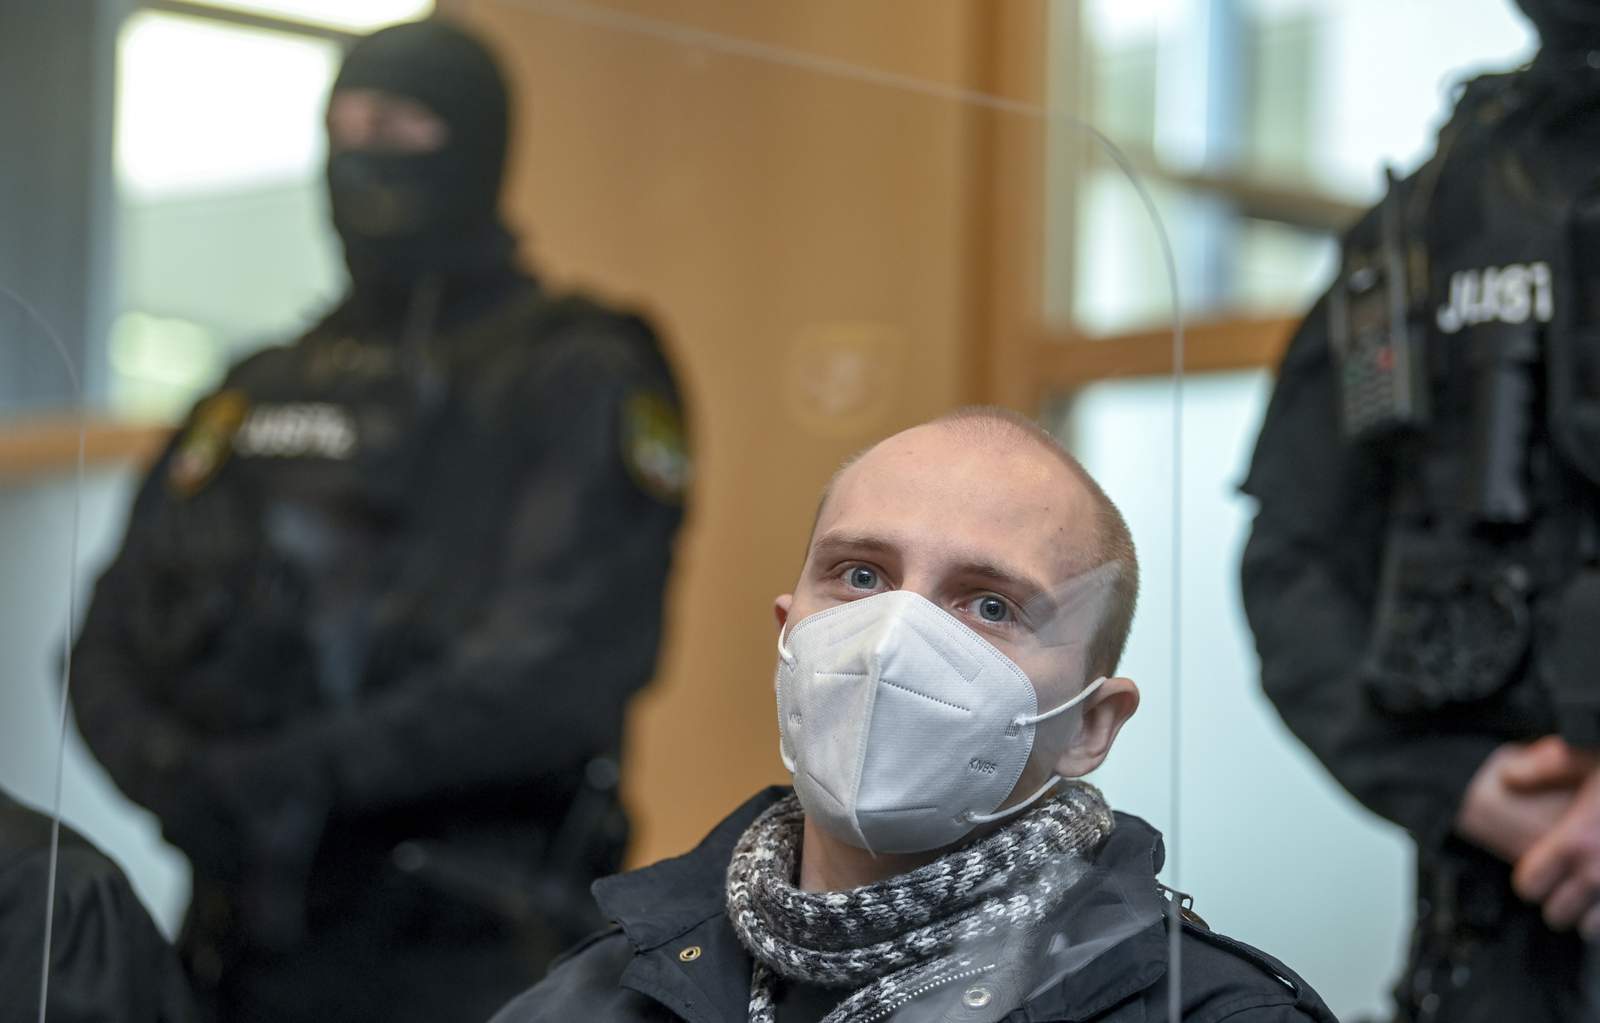 German court convicts man of murder over synagogue attack